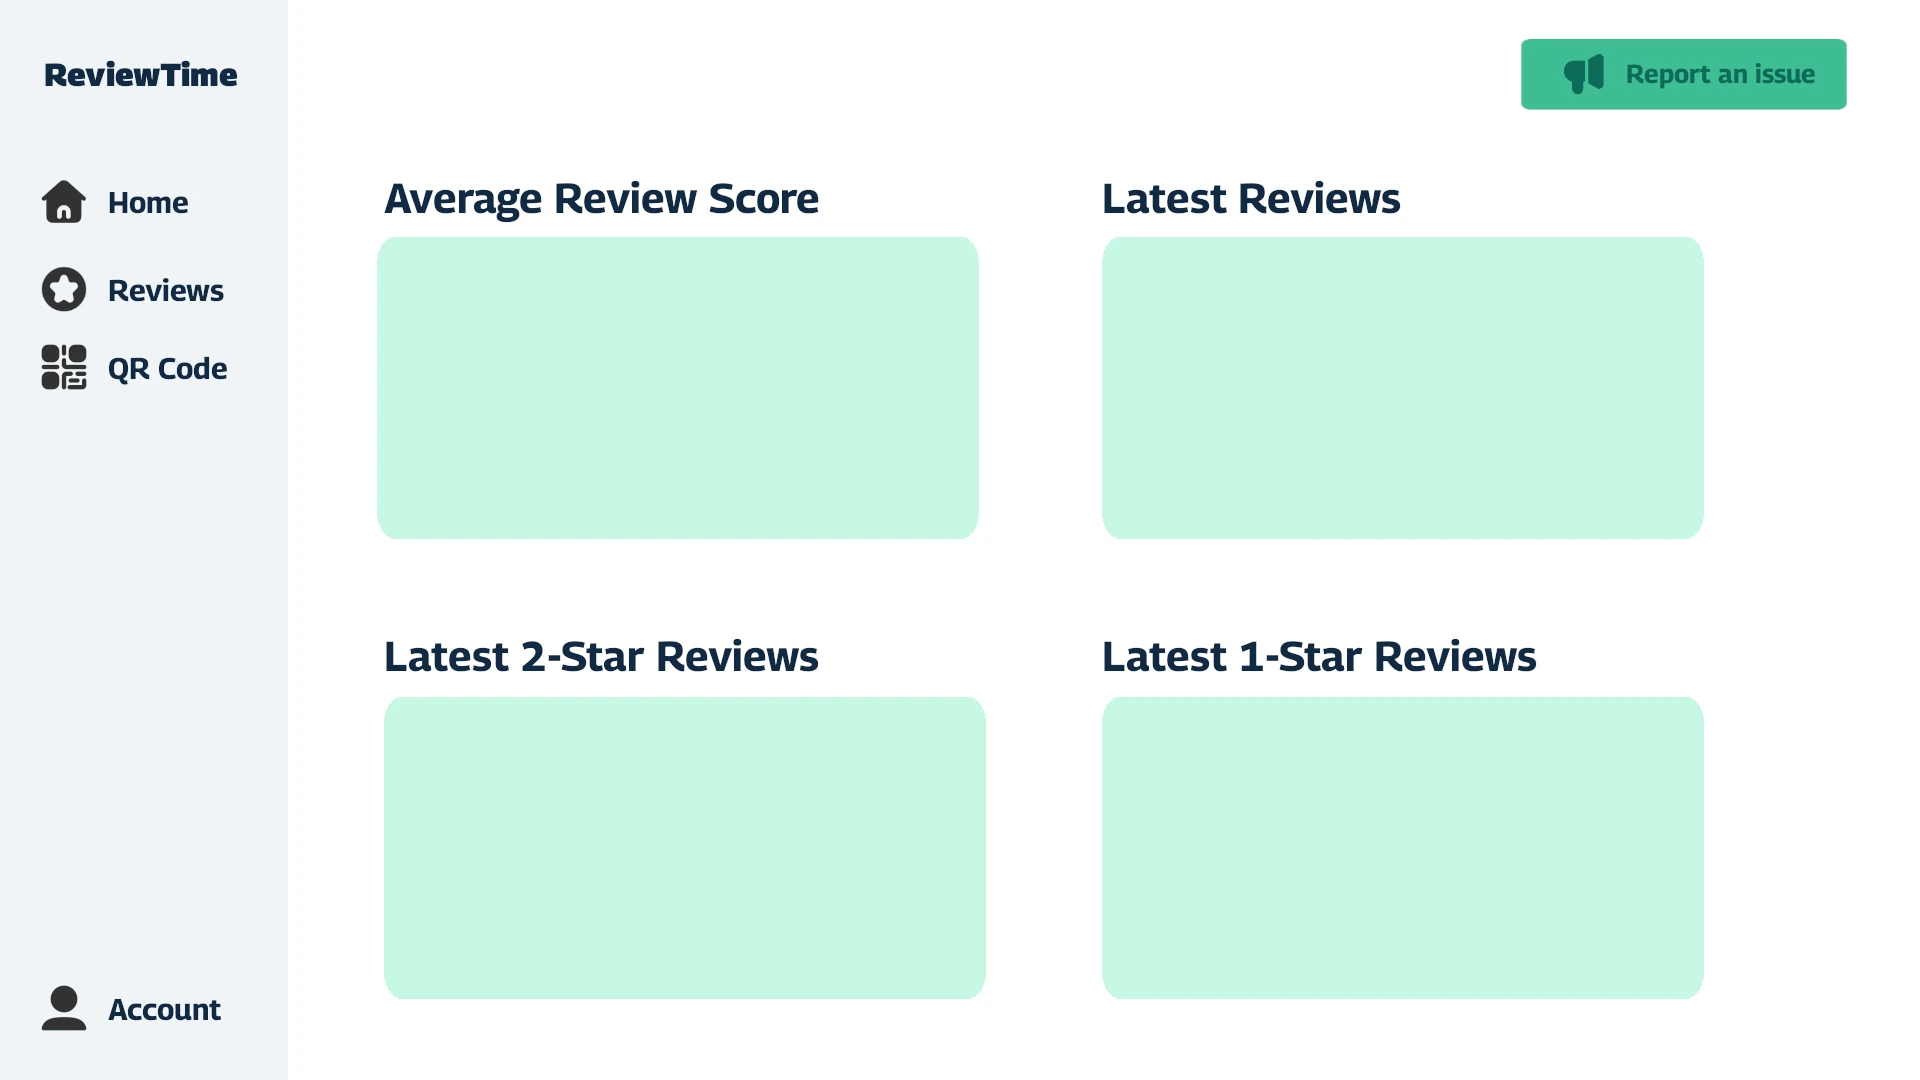 ReviewTime's dashboard demo